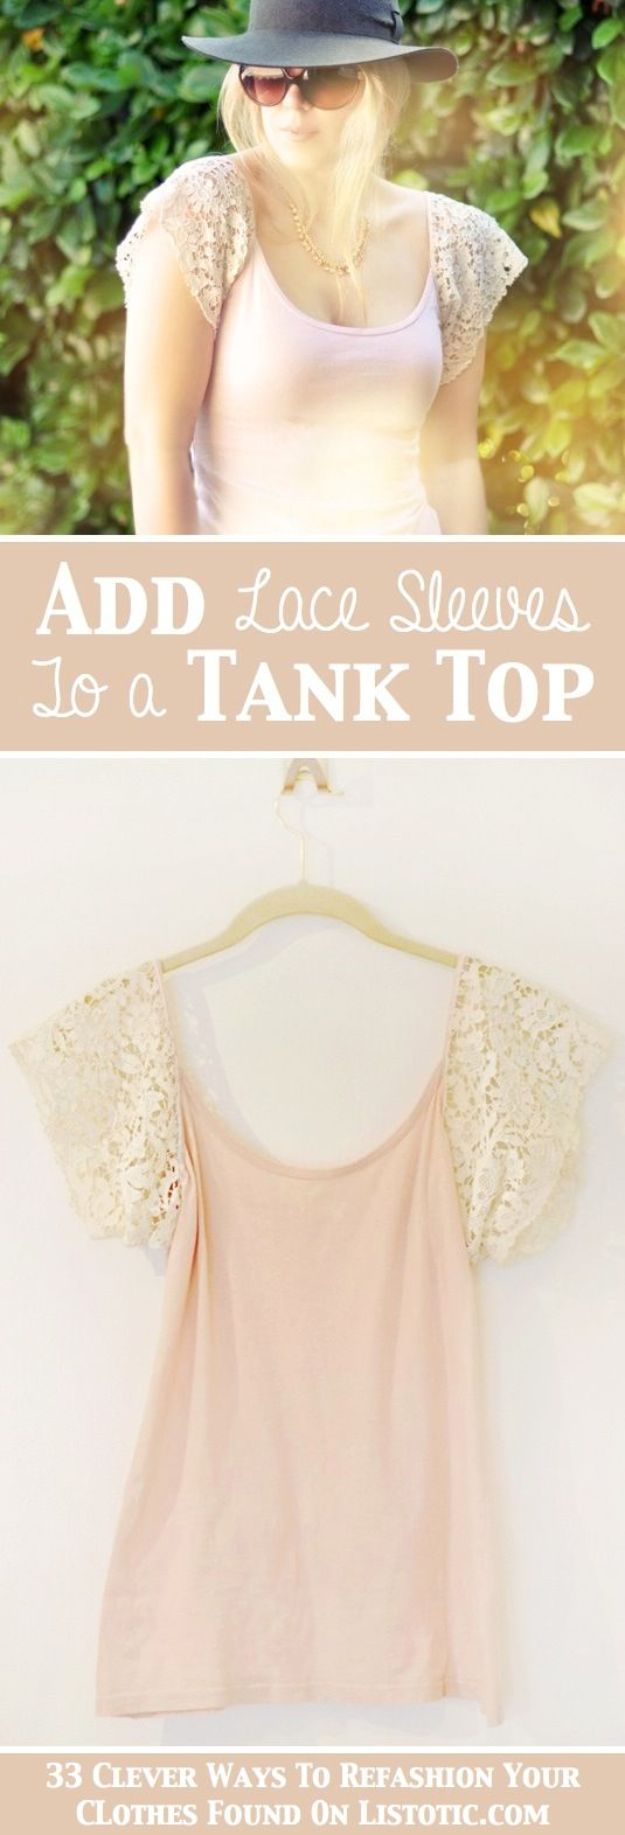 T-Shirt Makeovers - Easy DIY Lace Sleeve Tank Top - Fun Upcycle Ideas for Tees - How To Make Simple Awesome Summer Style Projects - Cute Sleeve and Neckline Ideas - Cheap and Easy Ways To Upcycle Tshirts for Fun Clothes and Fashion - Quick Projects for Teens and Teenagers on A Budget #teenfashion #tshirtideas #teencrafts